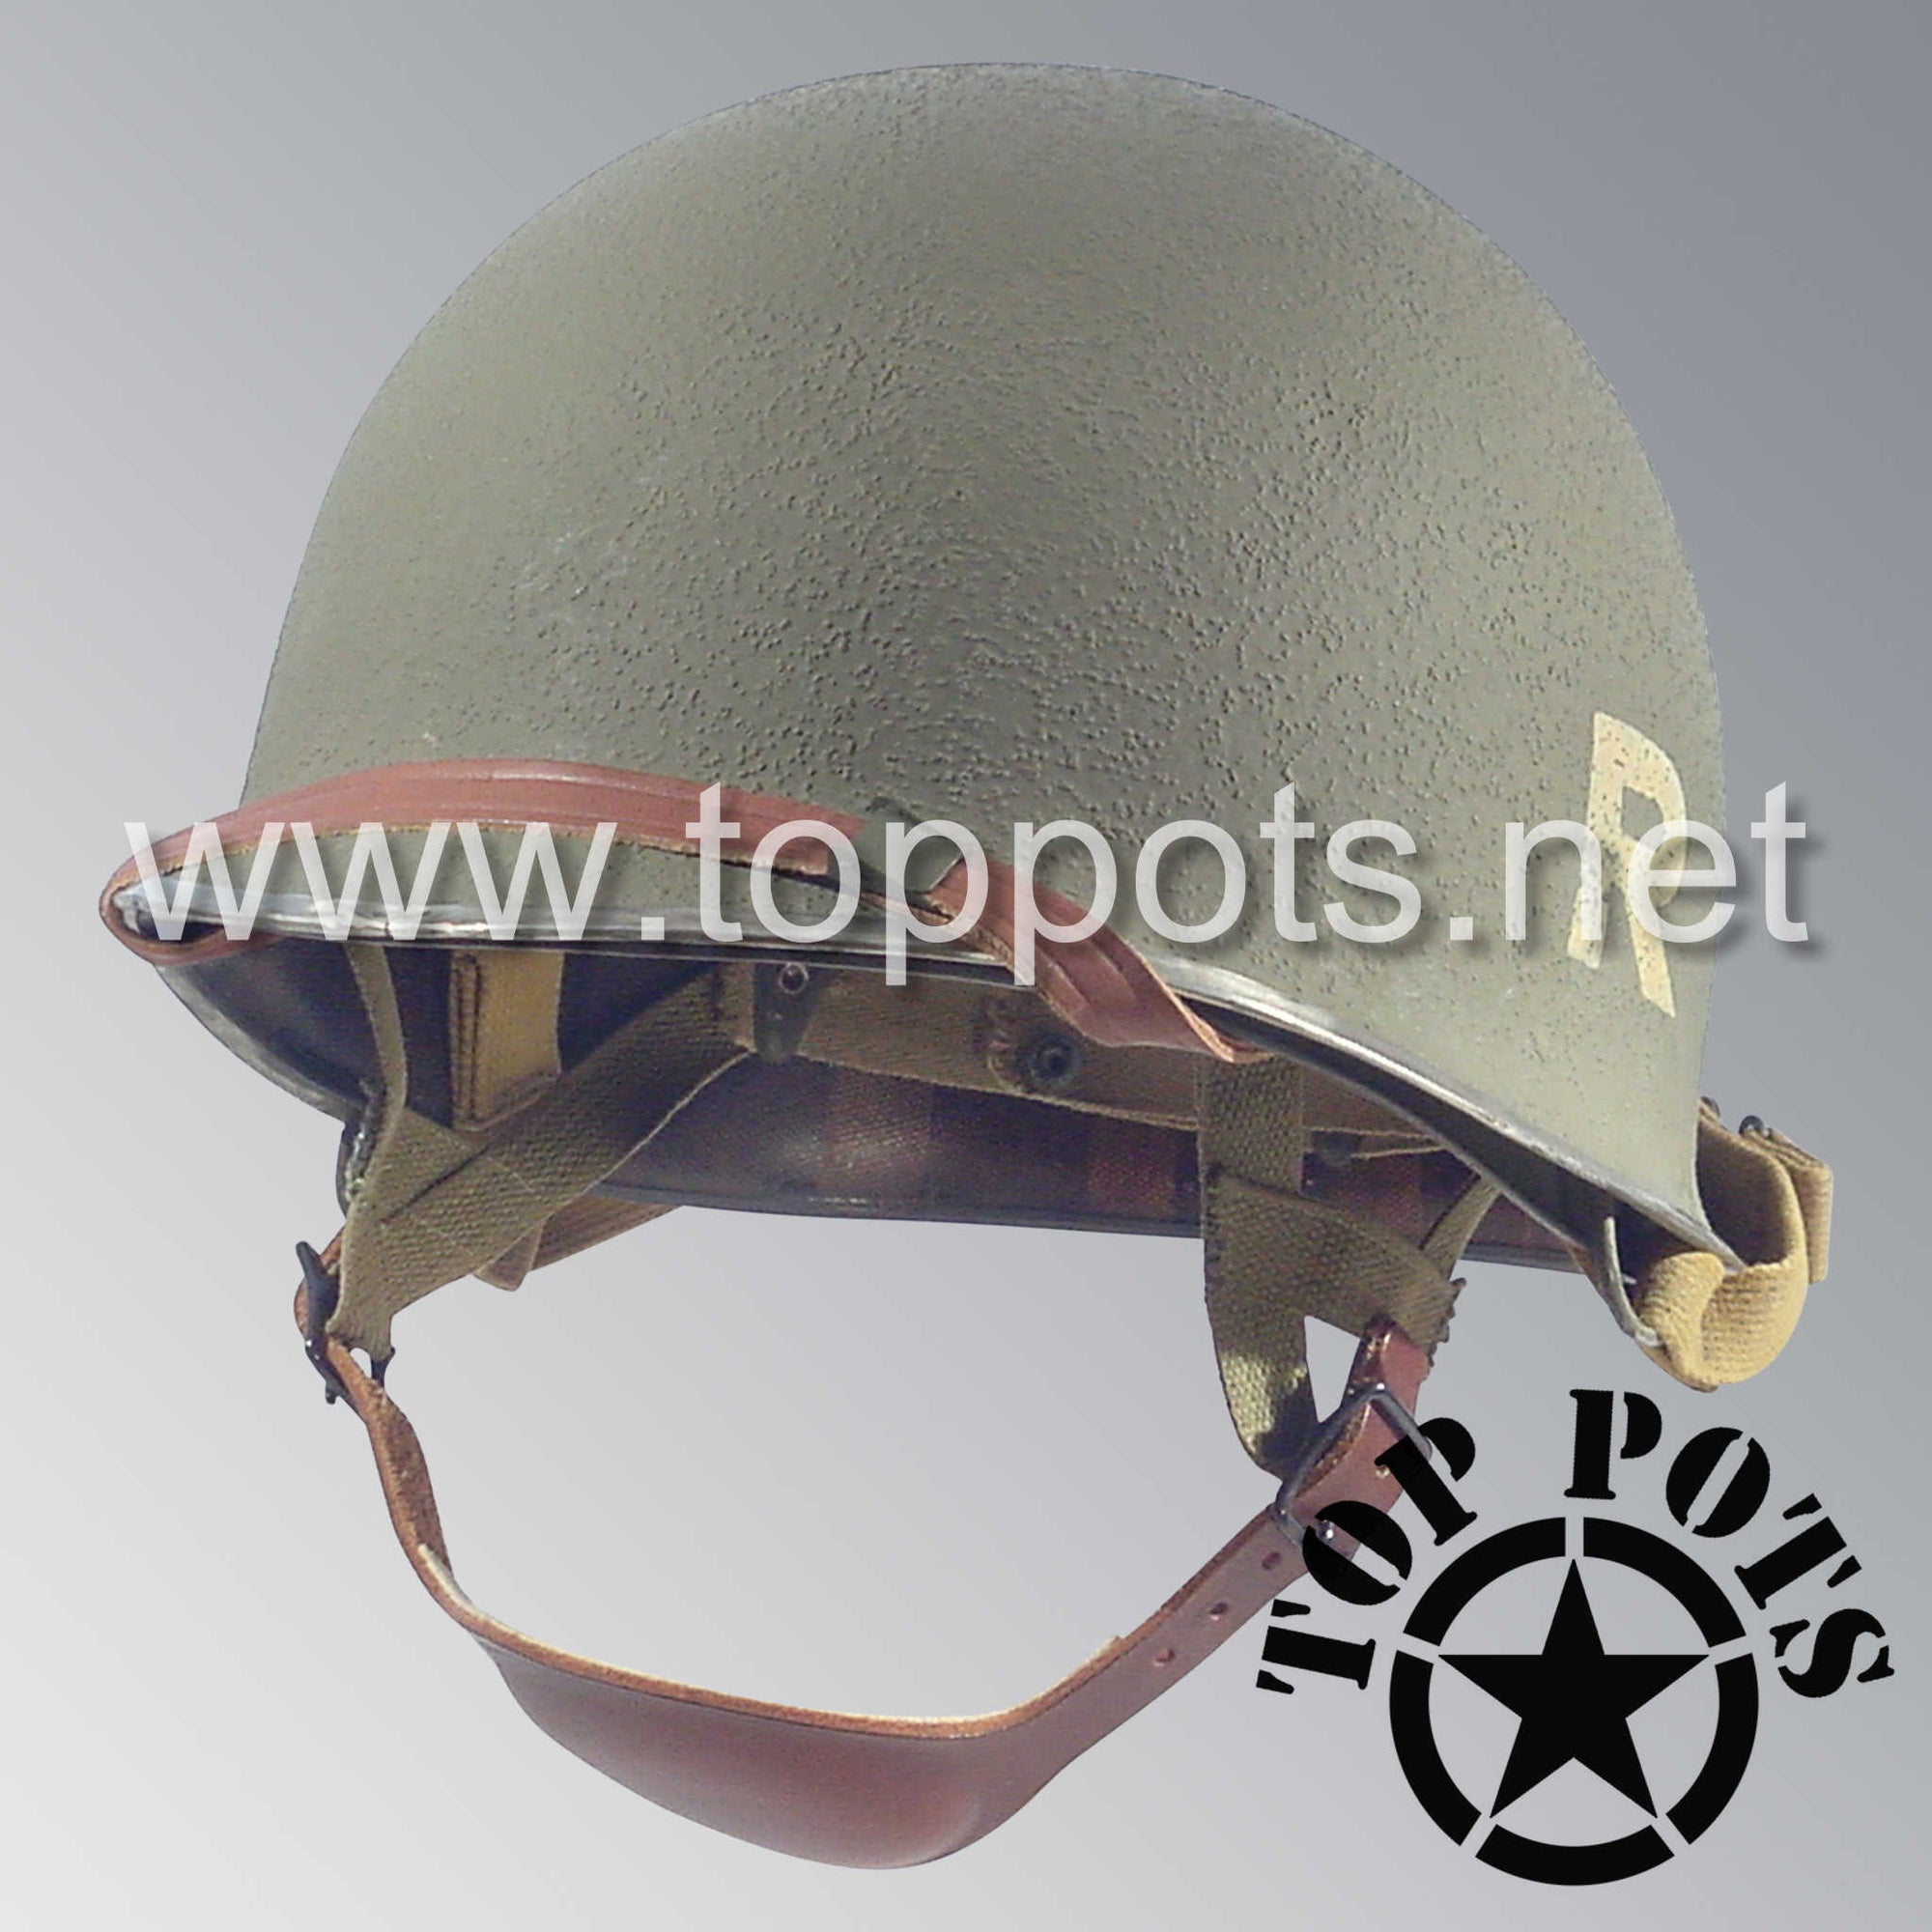 WWII US Army Aged Original M2 Paratrooper Airborne Helmet D Bale Shell and Liner with 101st Airborne Reconnaissance Recon Platoon Emblem